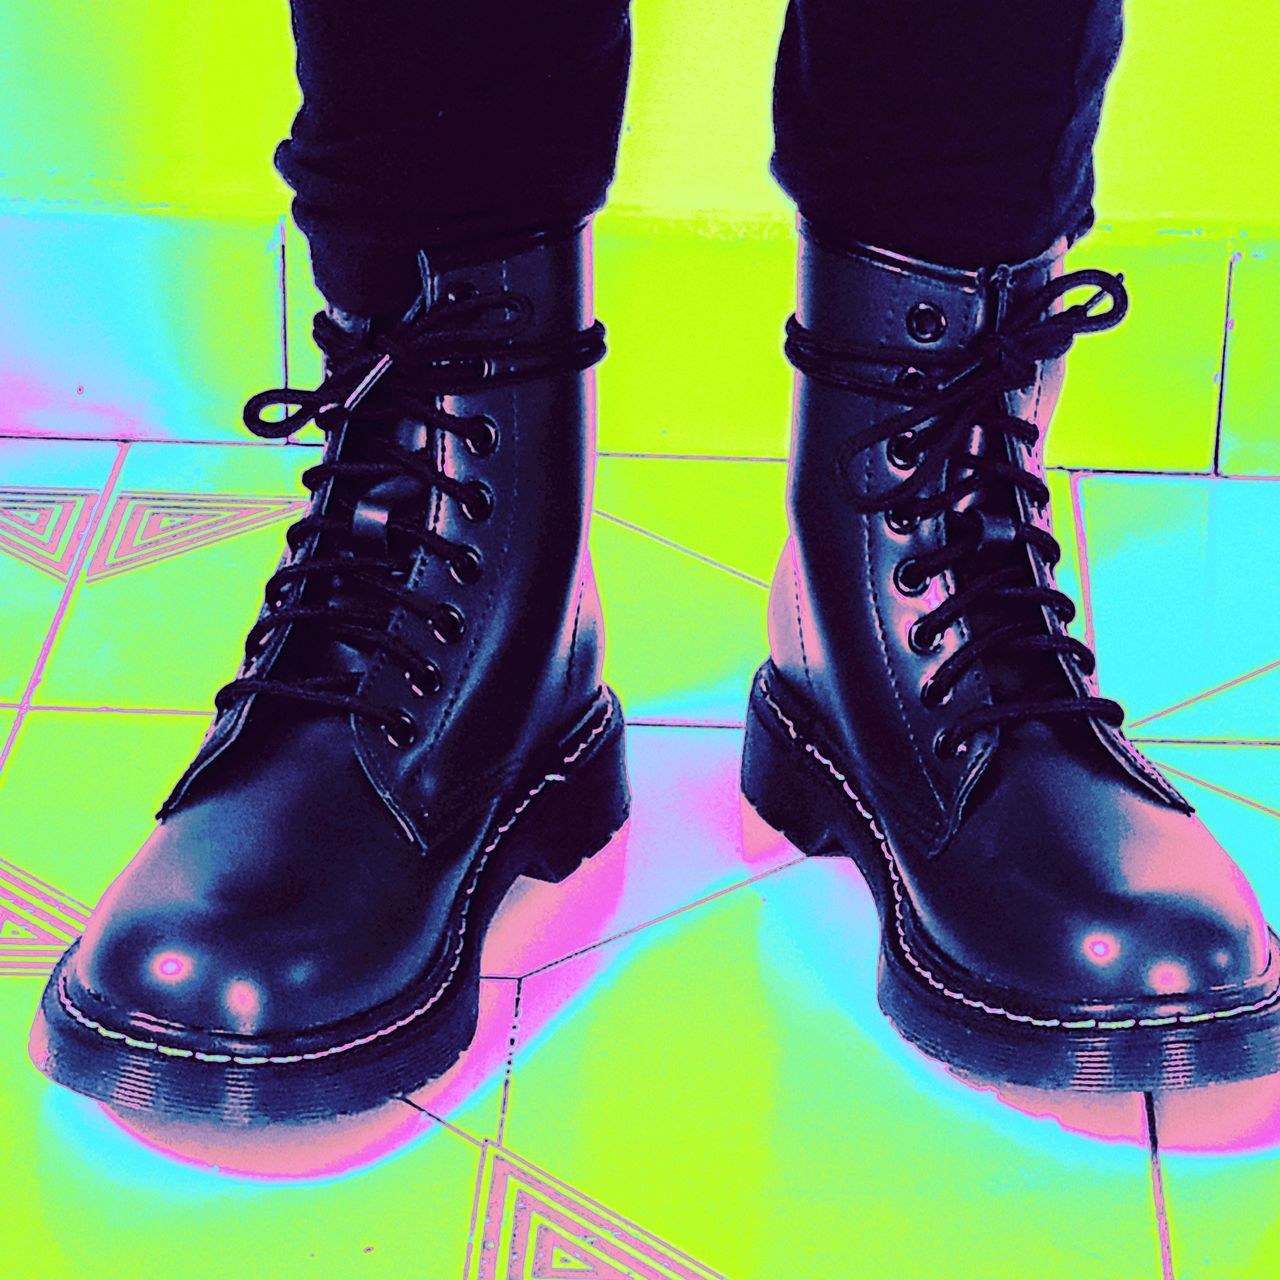 footwear, shoe, boot, low section, human leg, limb, human limb, indoors, close-up, adult, purple, fashion, black, green, human foot, one person, arts culture and entertainment, standing